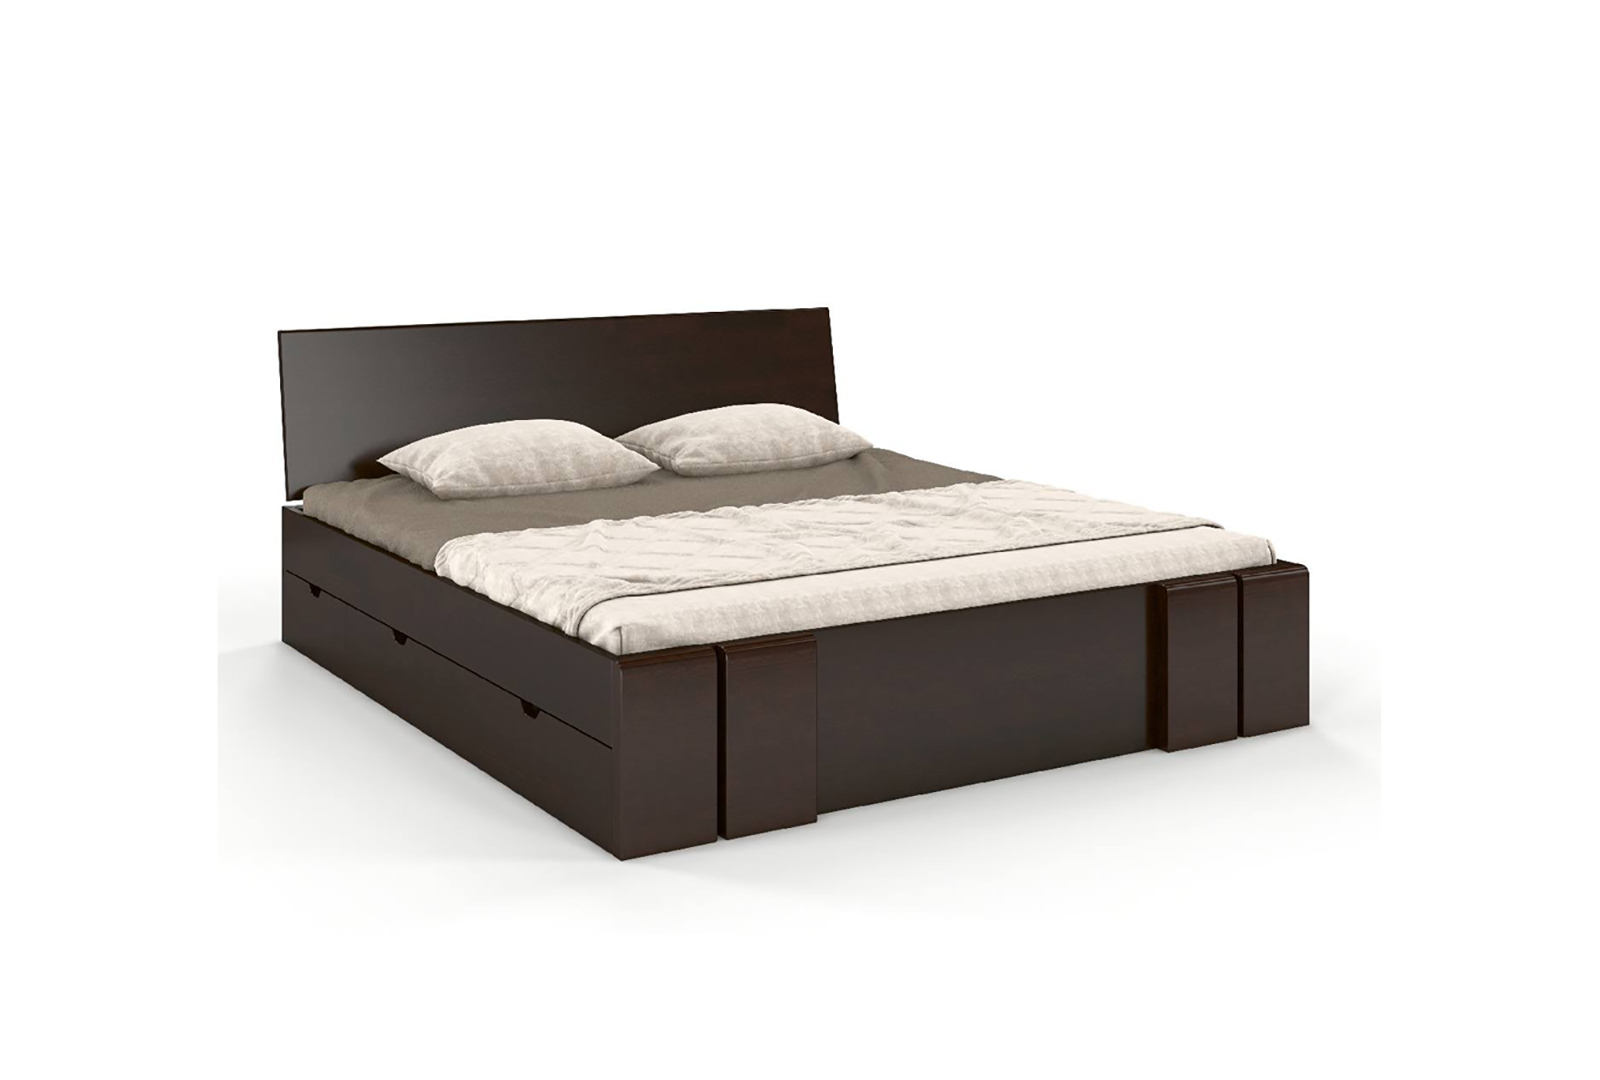 WOODEN PINE BED WITH DRAWERS SKANDICA VESTRE MAXI AND DR 2